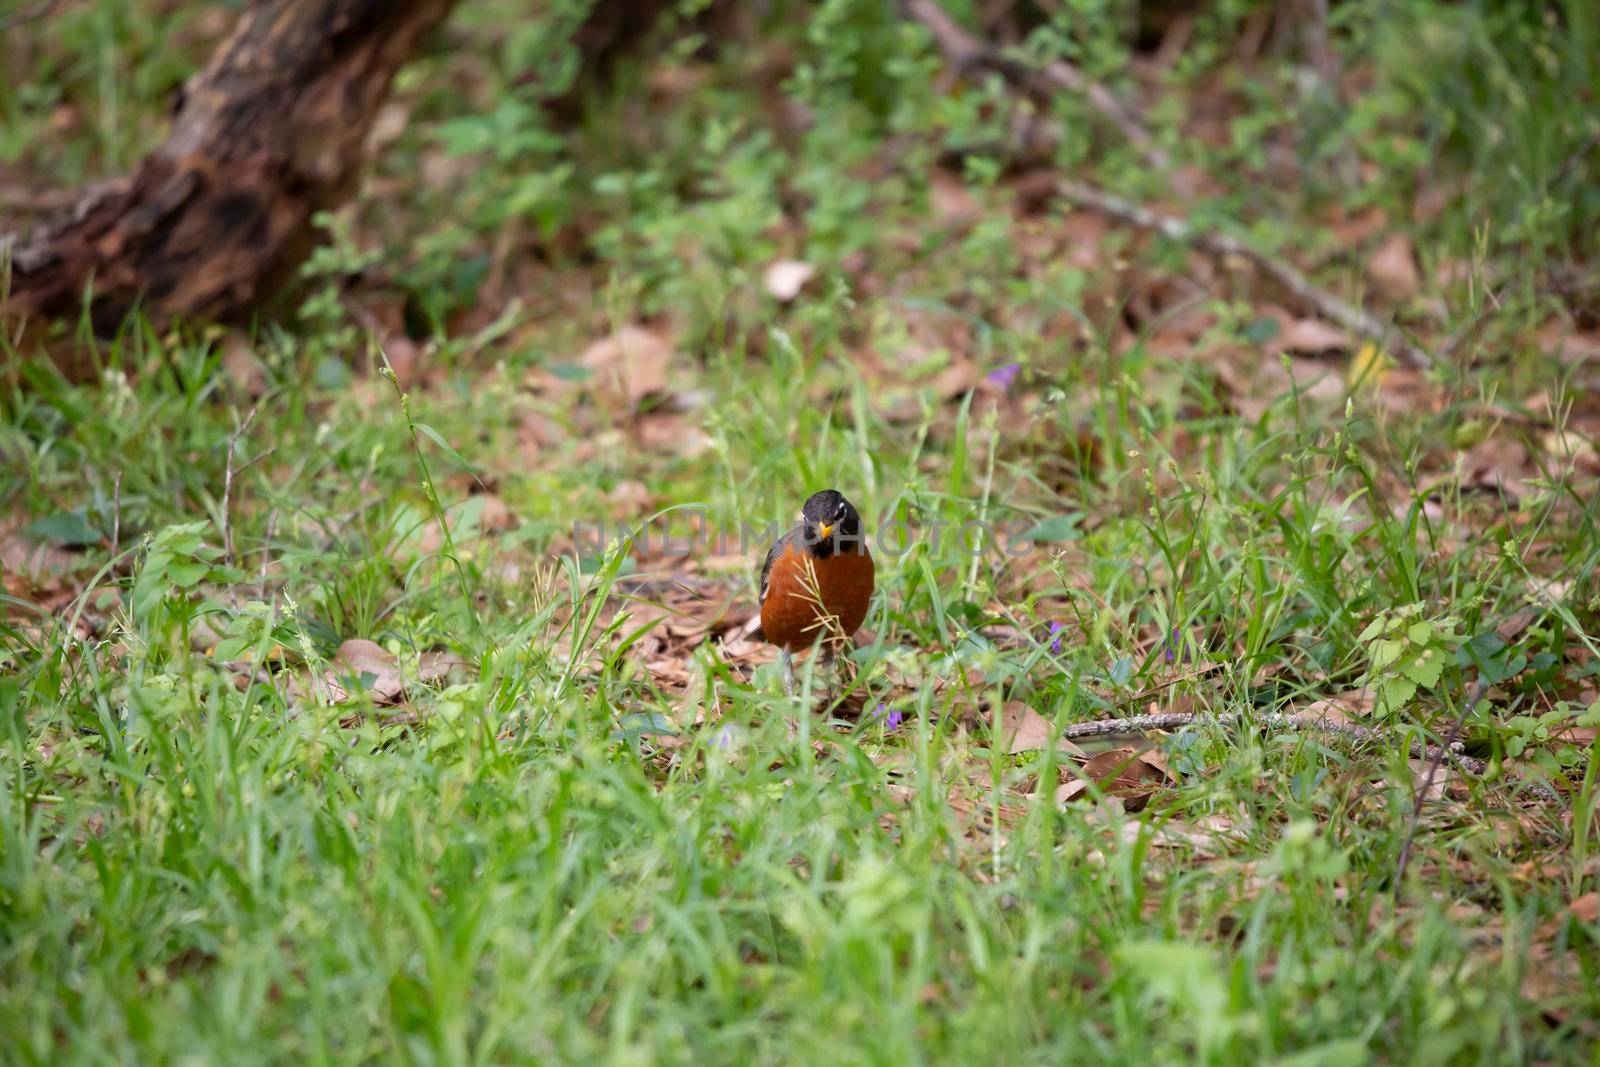 Watchful American robin (Turdus migratorius) looking around warily as it forages for insects in green grass on the ground